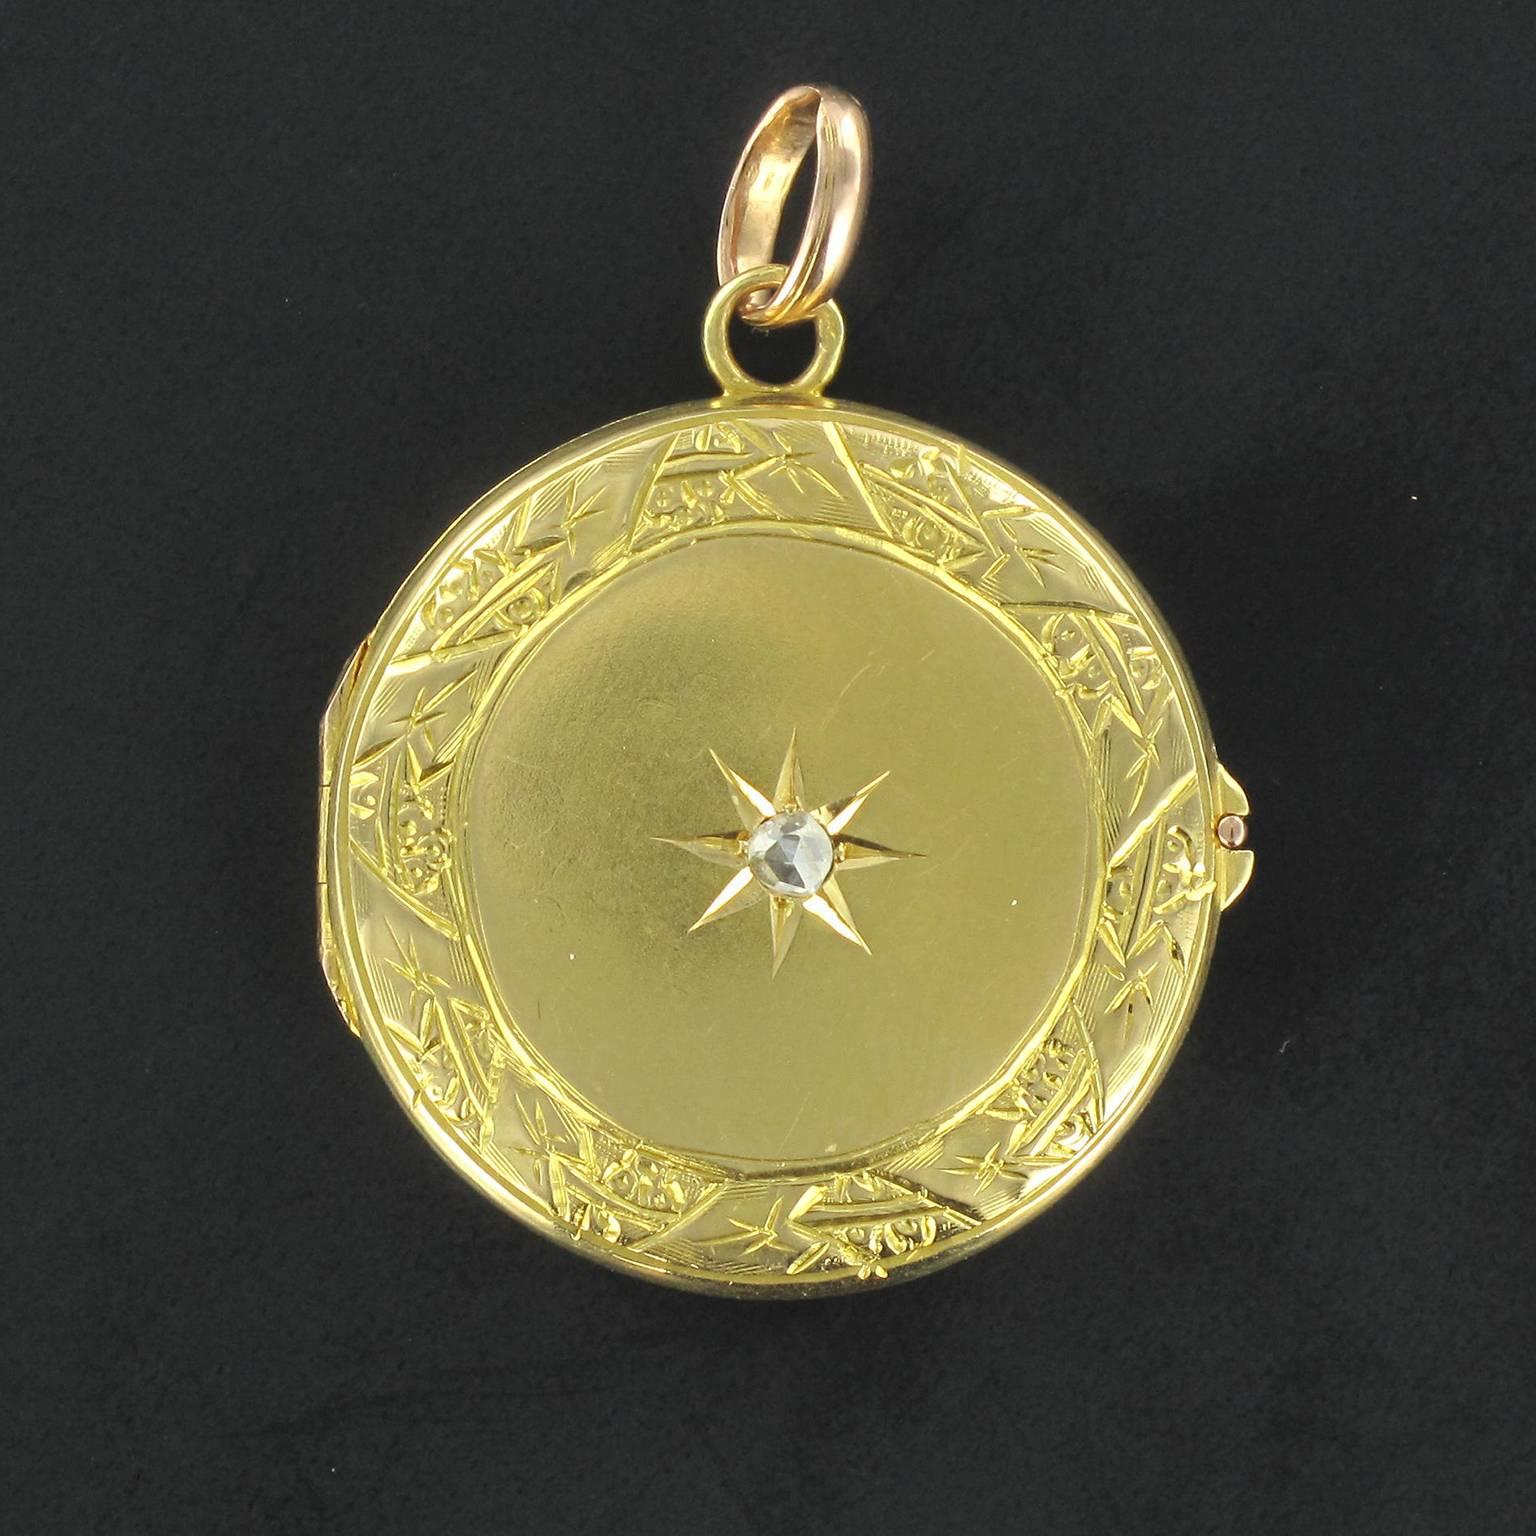 Medallion in 18 carat yellow gold, eagle head hallmark. 

This superb round antique medallion is set at the front with a sun design featuring a beautiful central radiant rose cut diamond. The gold medallion is finely chiselled around the edge. The